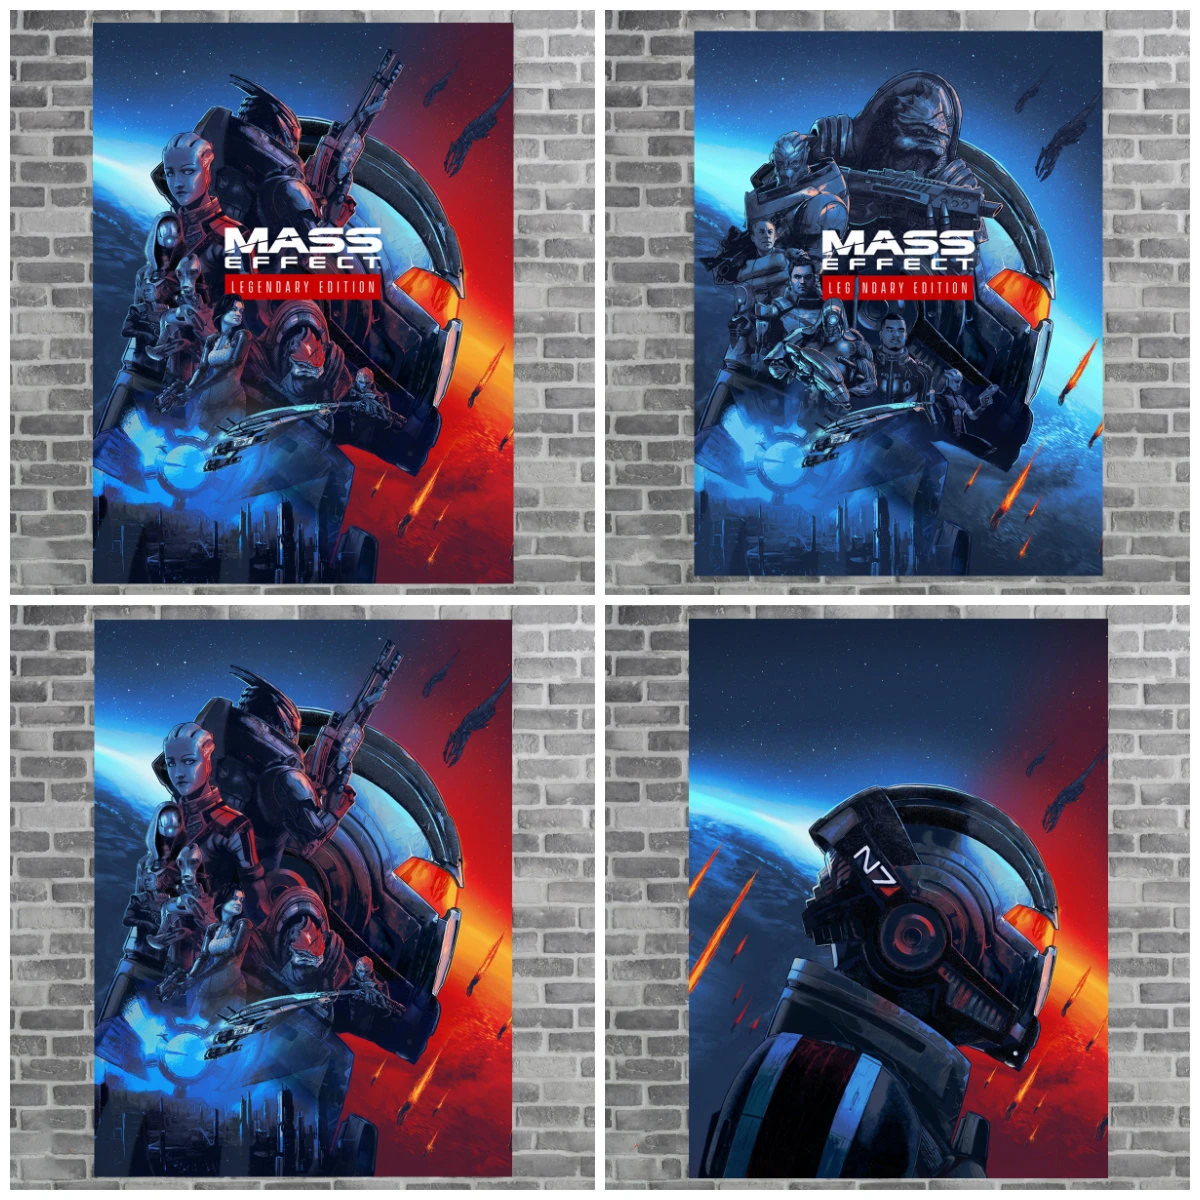 Mass Effect Legendary Edition Game Anime Poster Canvas Oil Painting Live  Room Wall Decor Wall Stickers Home Decoration Painting|Painting &  Calligraphy| - AliExpress